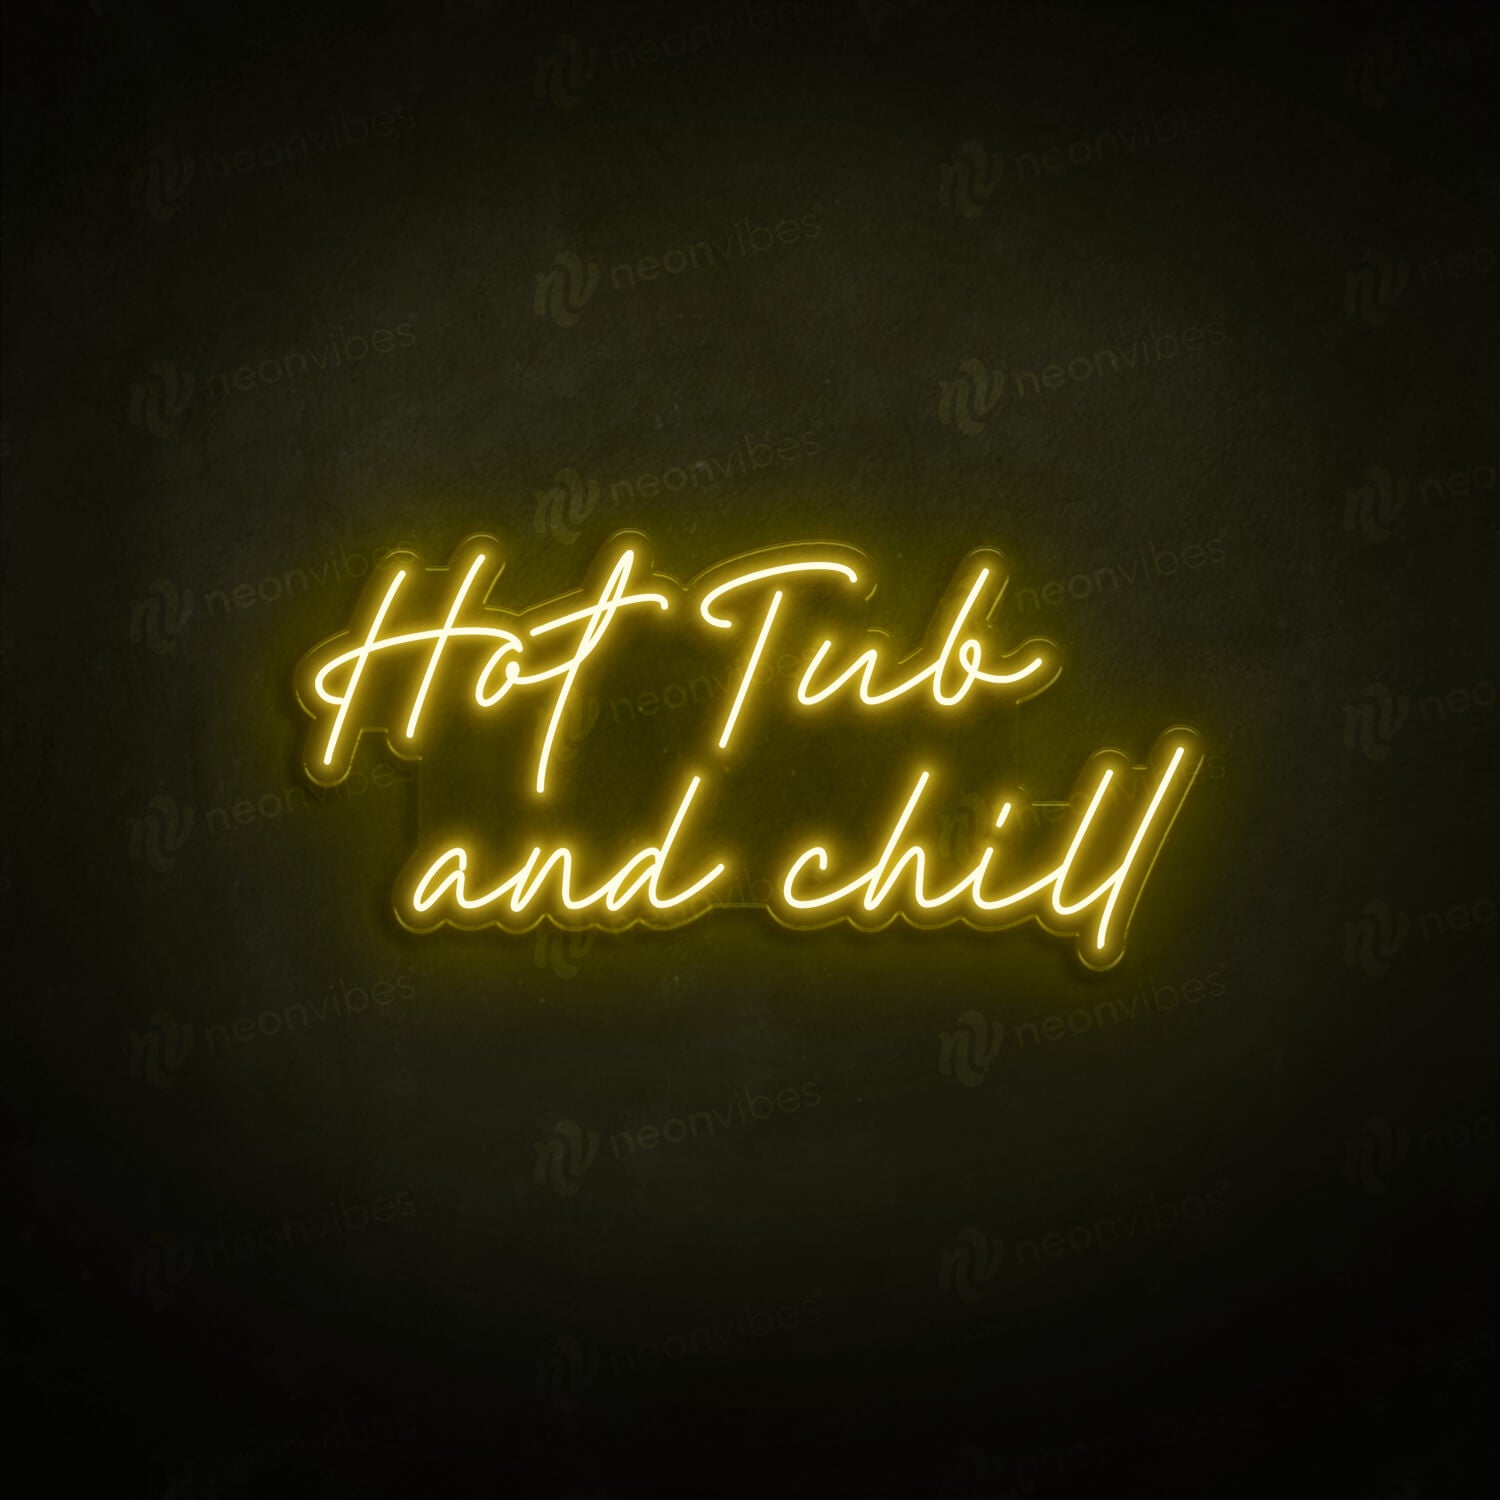 Hot tub and chill neon sign